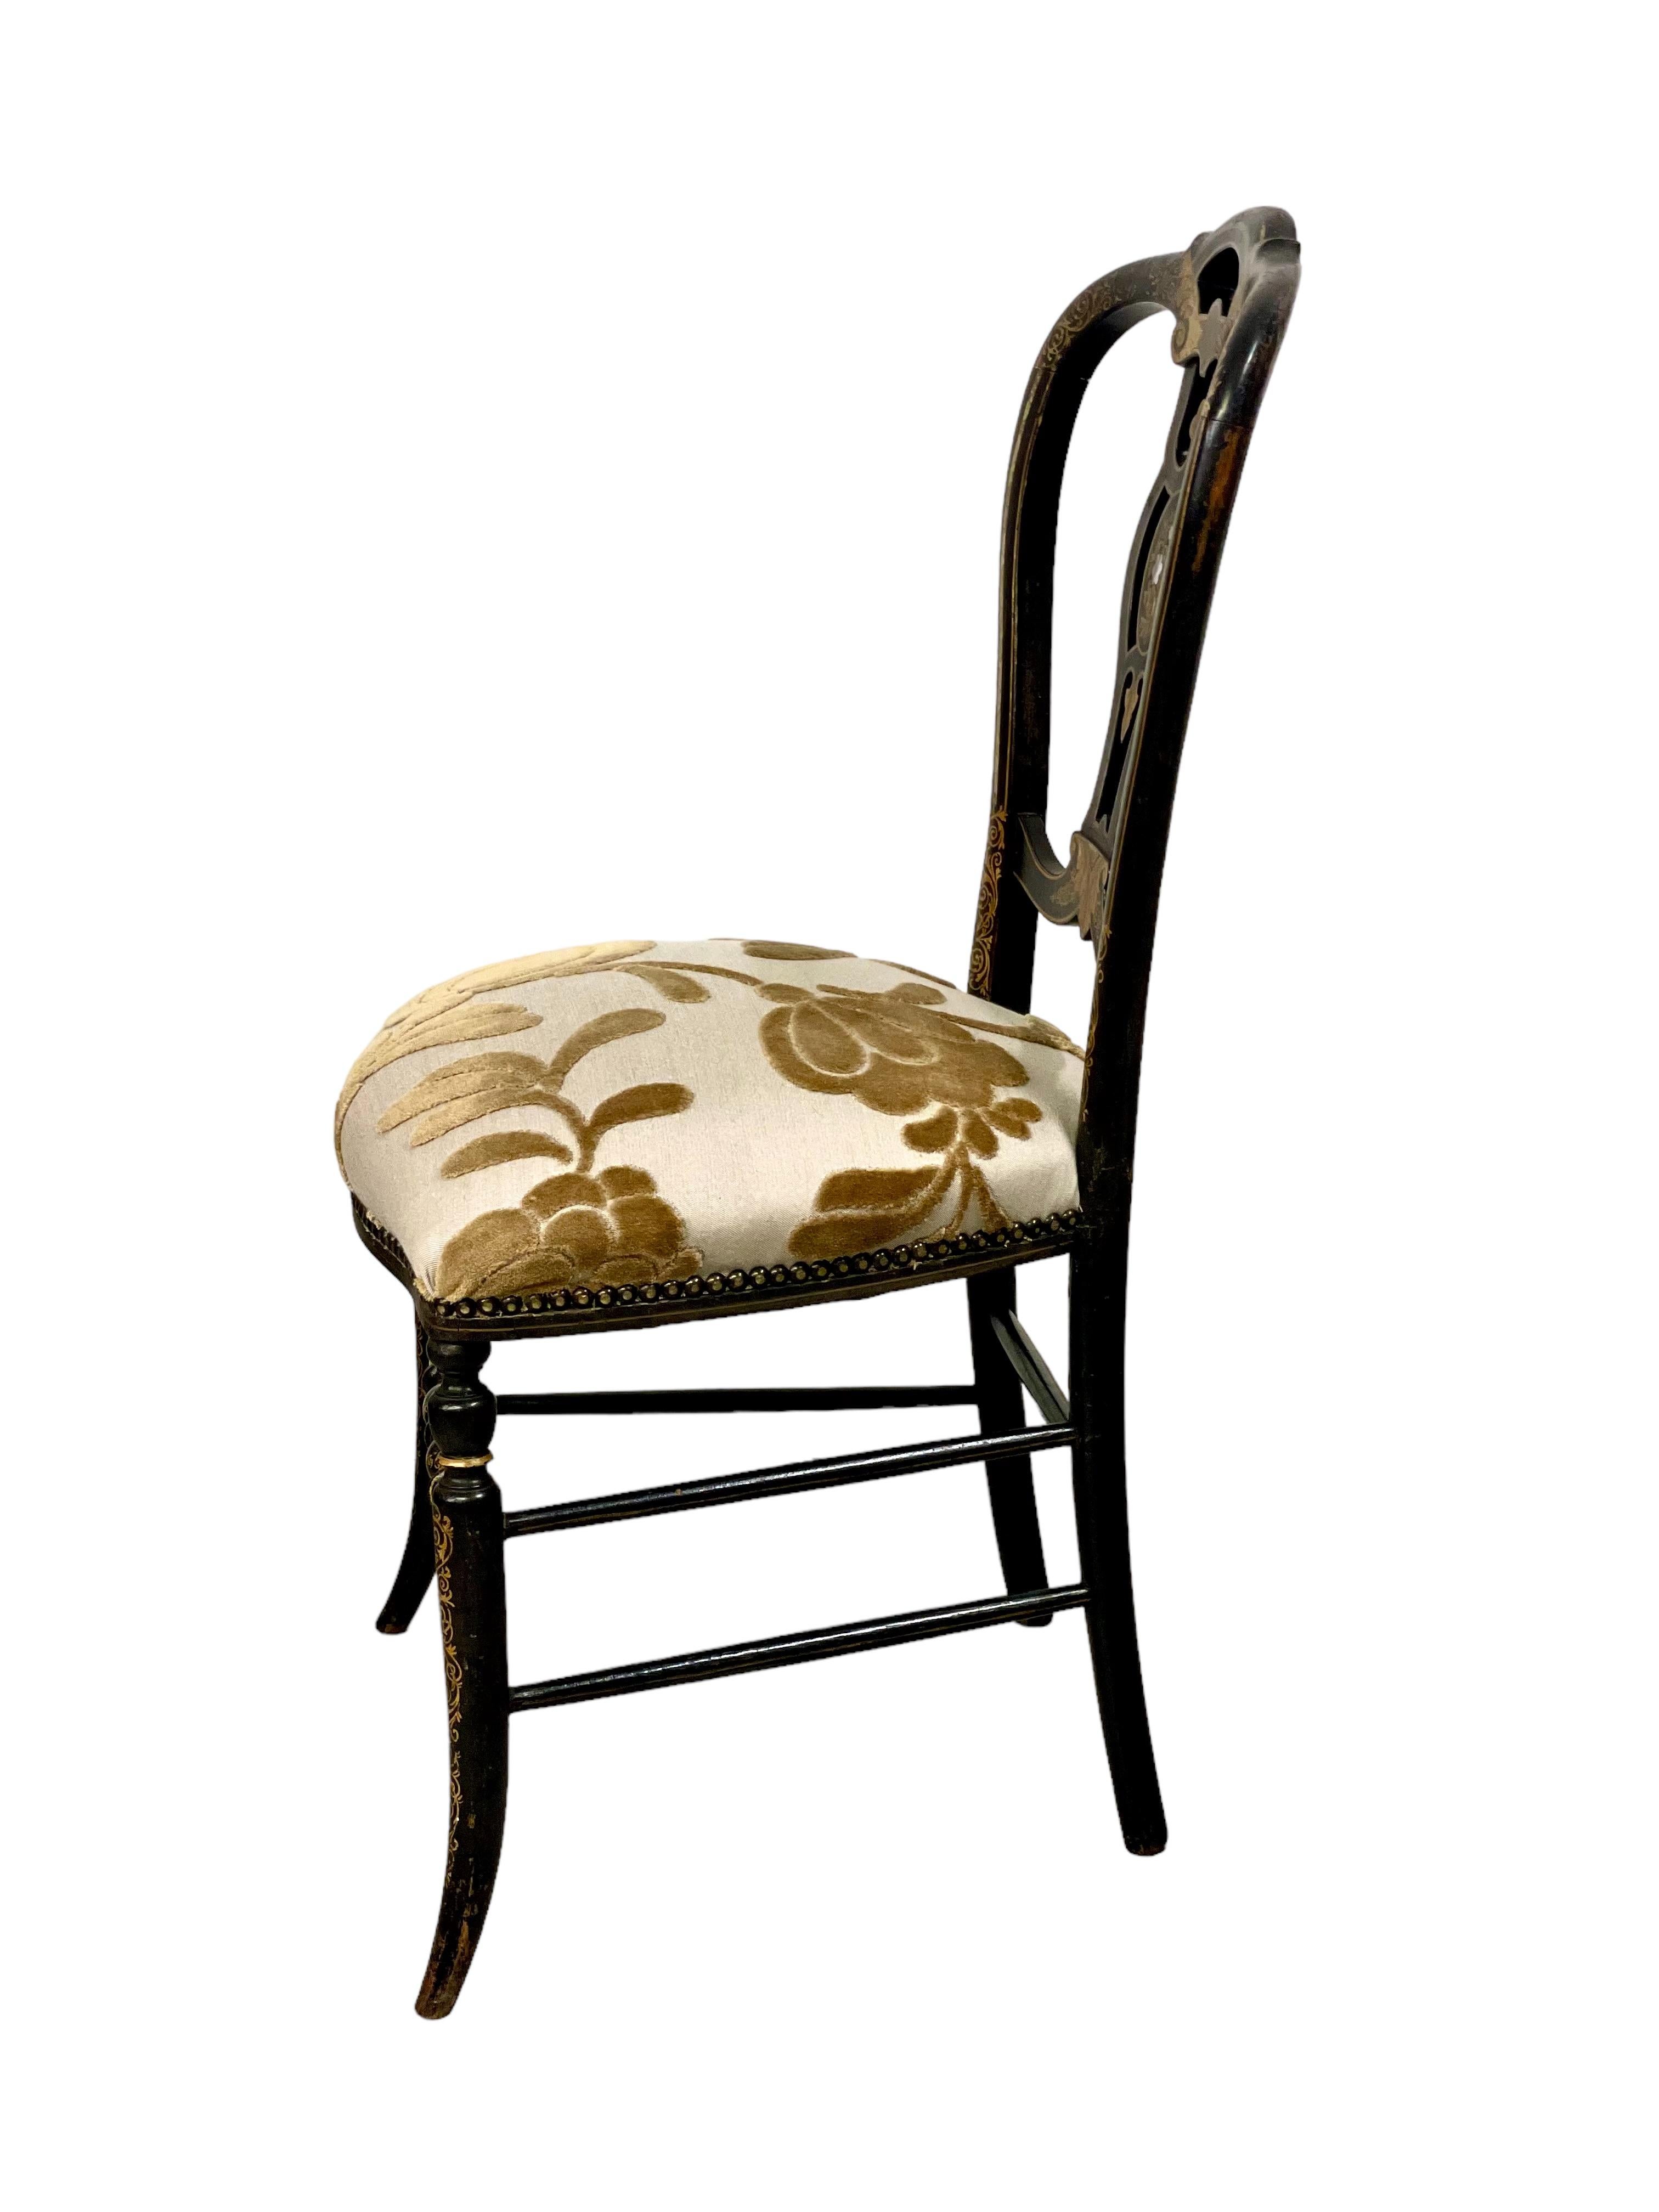 An elegant 19th century Napoleon III period decorative fireside chair (chaise chauffeuse), its deep and comfortable seat cushion beautifully upholstered in a striking cream and bronze-coloured fabric, secured all round with a nail- head trim. The